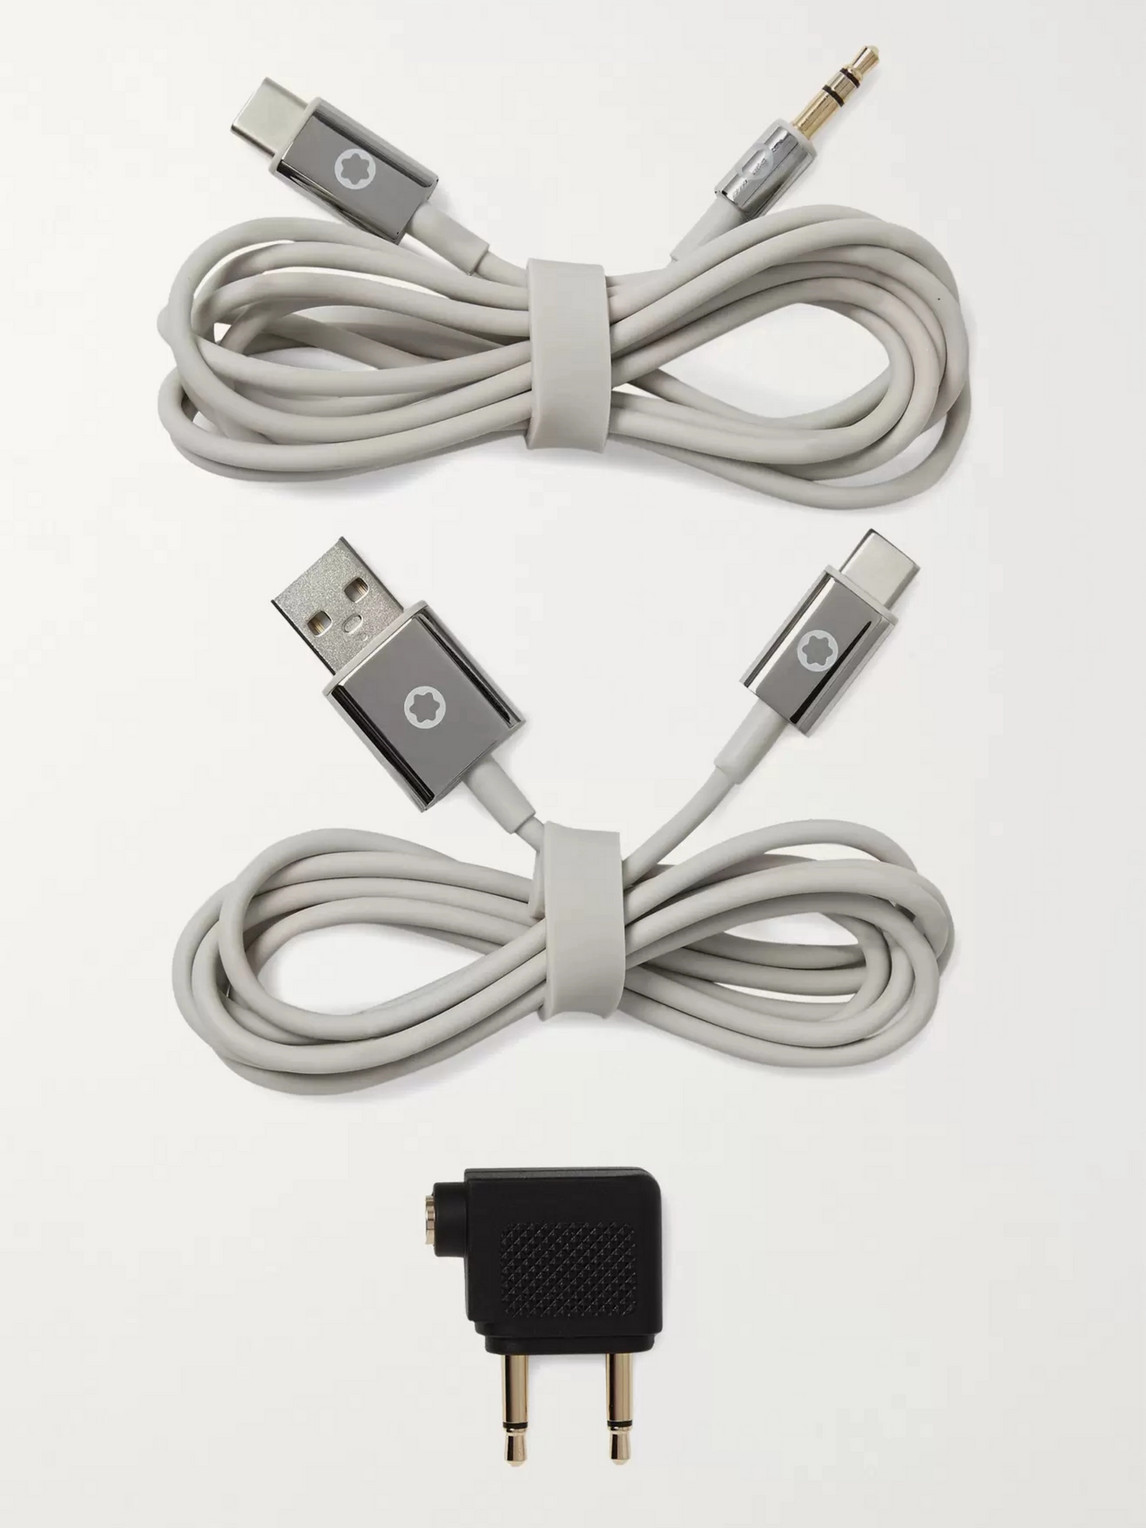 Montblanc Mb 01 Travel Charger And Cable Set In Gray